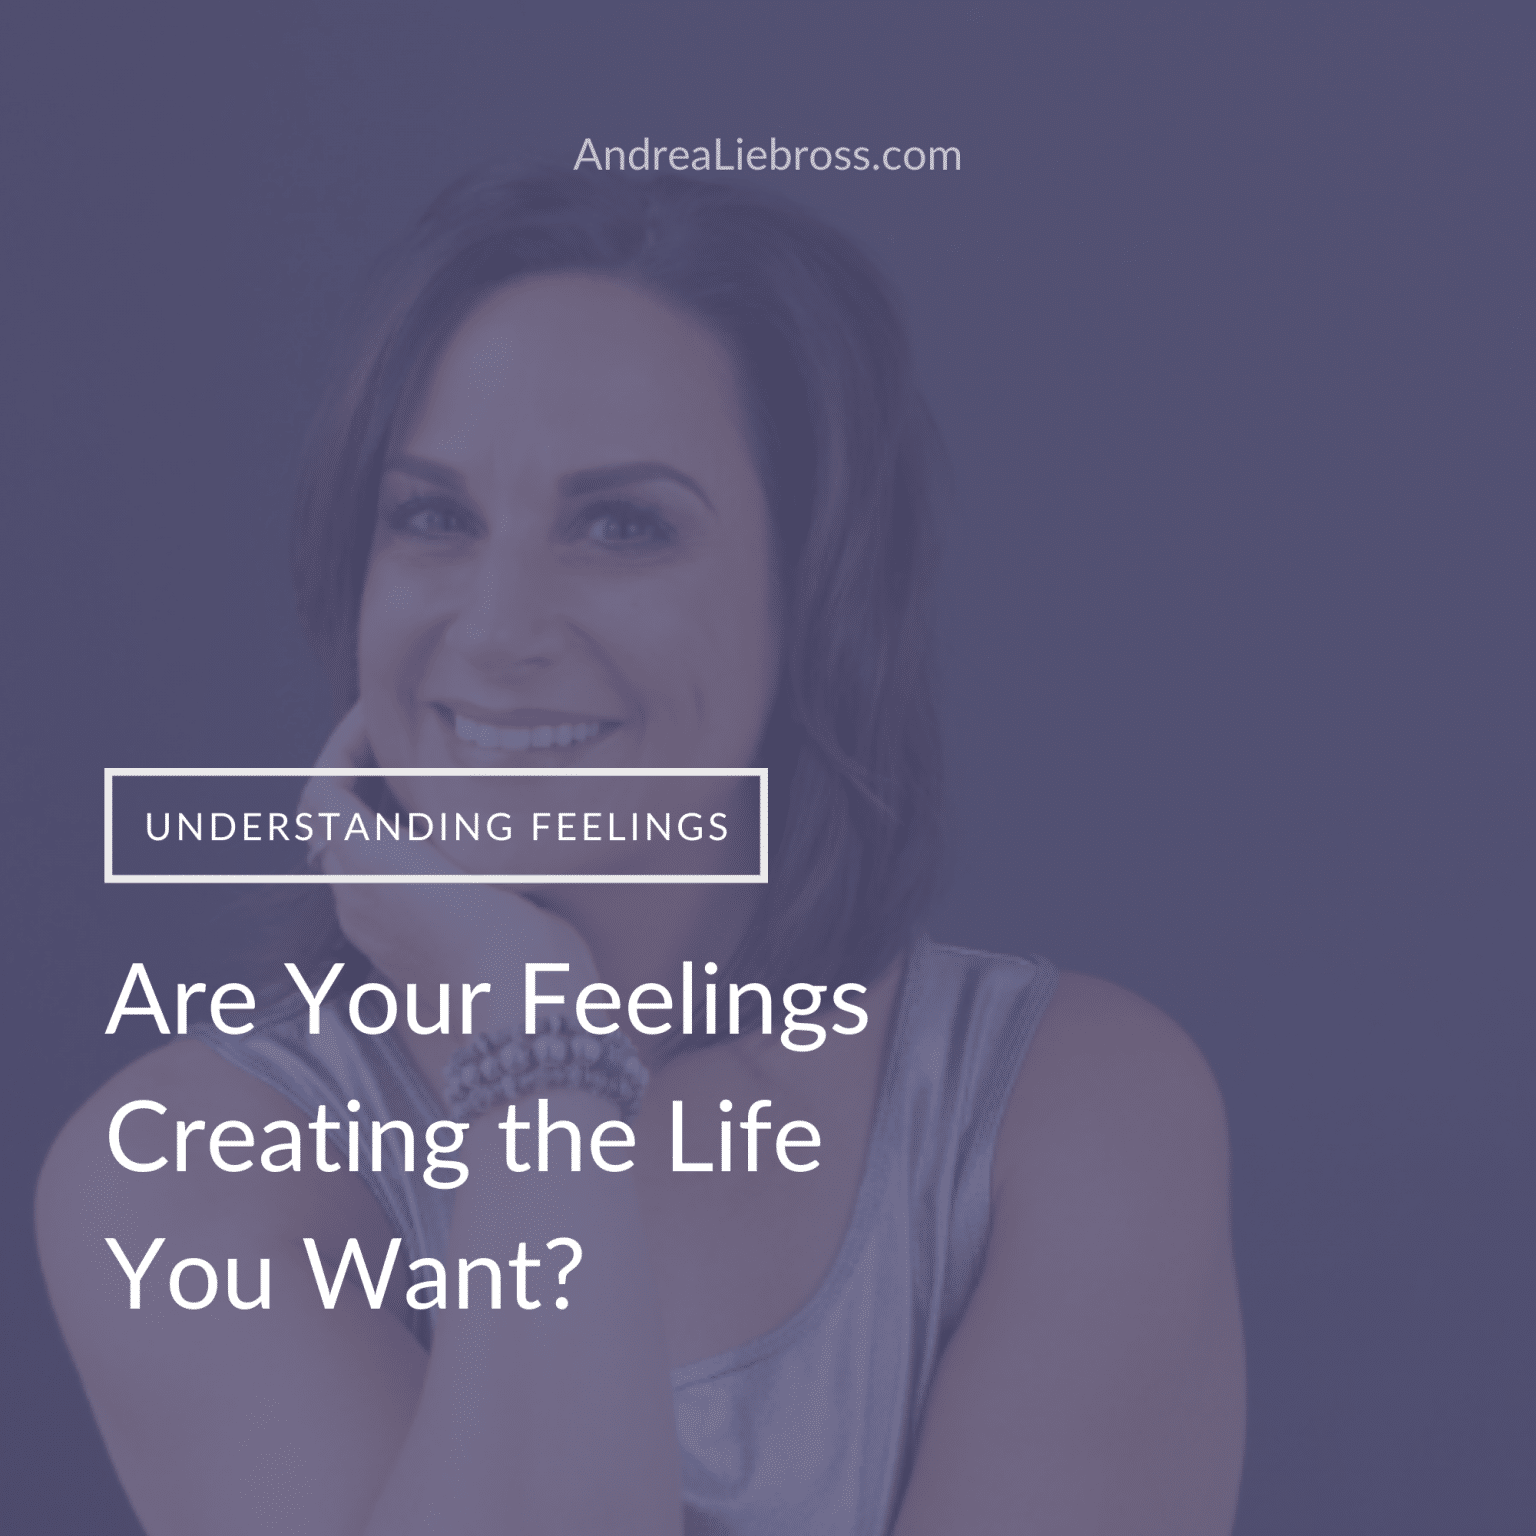 Are your feelings creating the life you want?